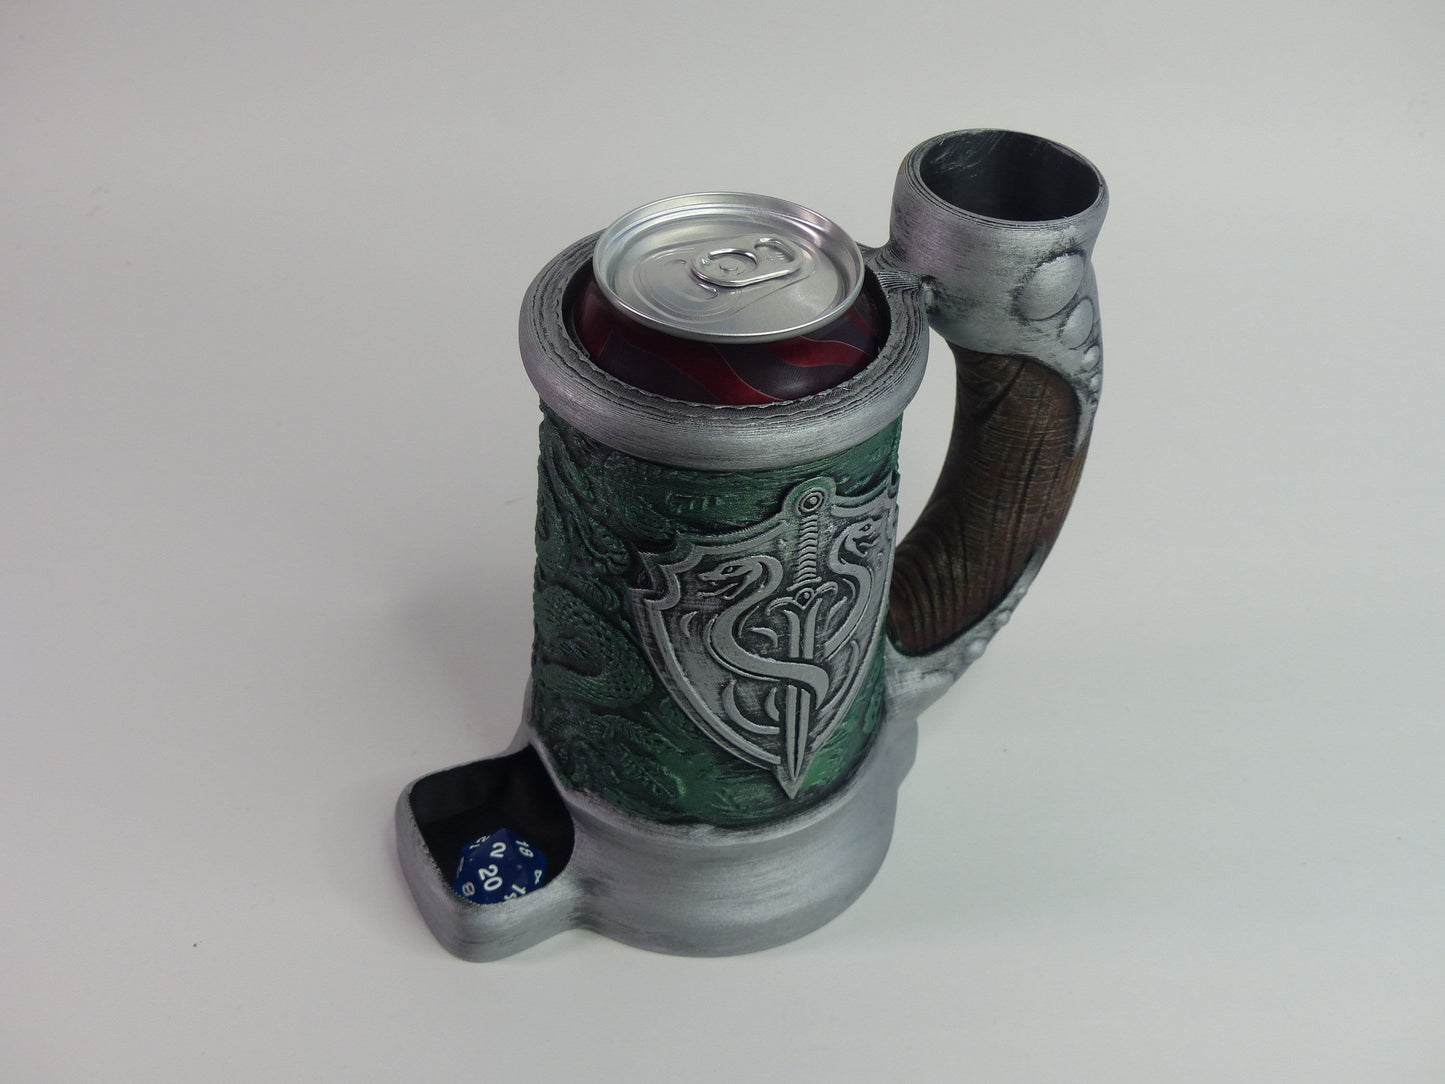 Snake Crest Can Cosy/Cozy DnD Dice Tower - 3D printed and hand painted - Can be personalised!